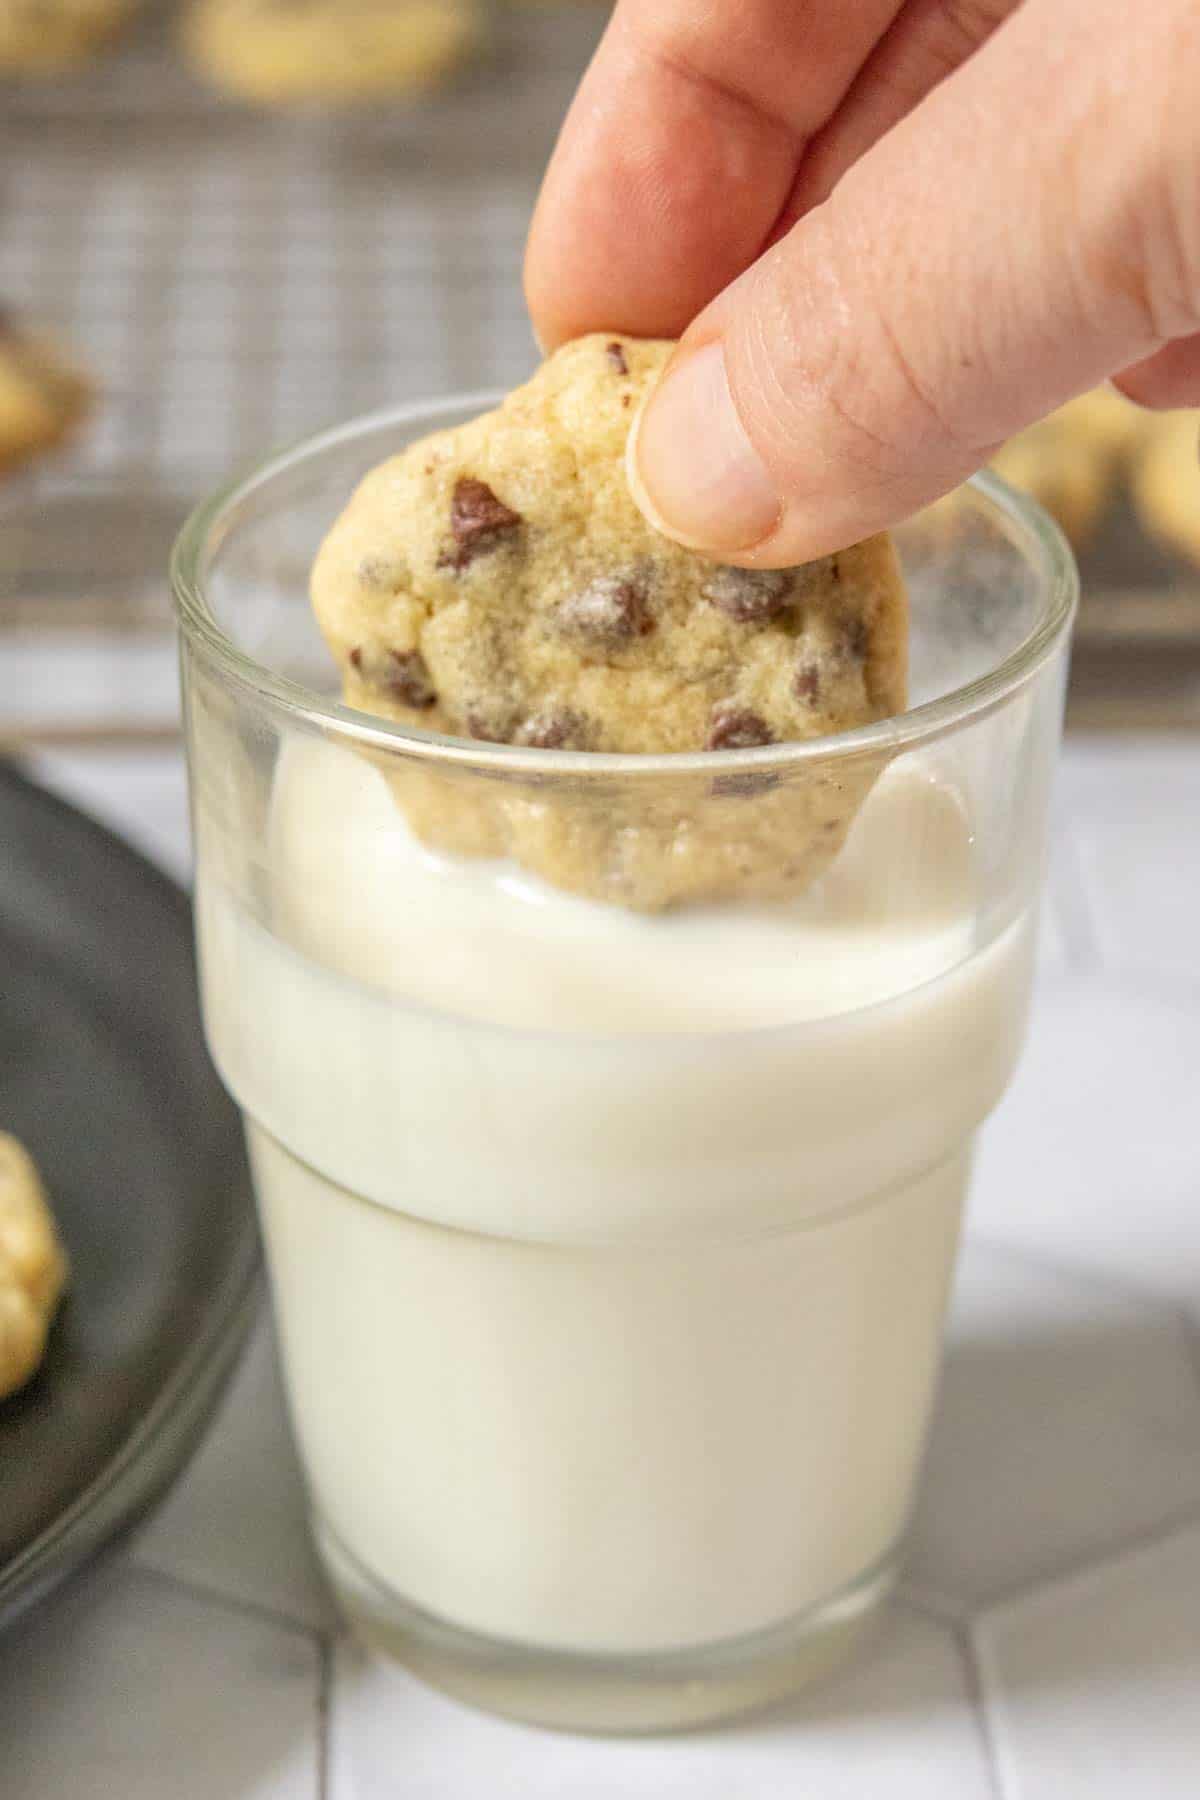 Dunking mini chocolate chip cookie into a small glass of milk.